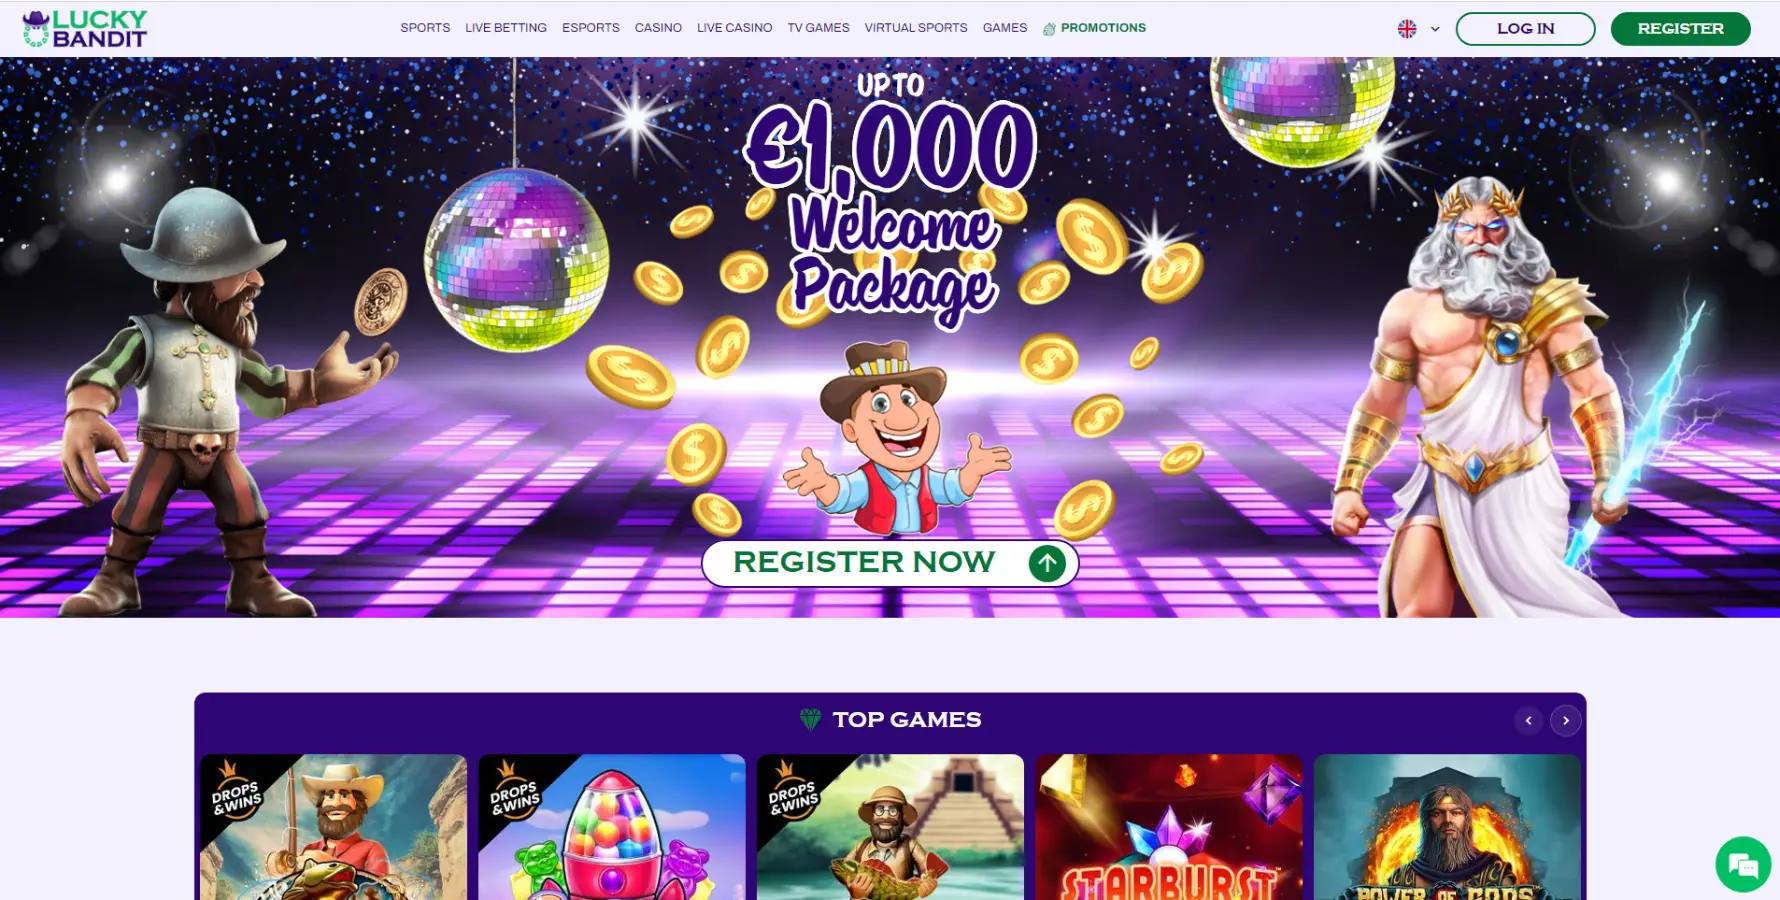 About Lucky Bandit Casino